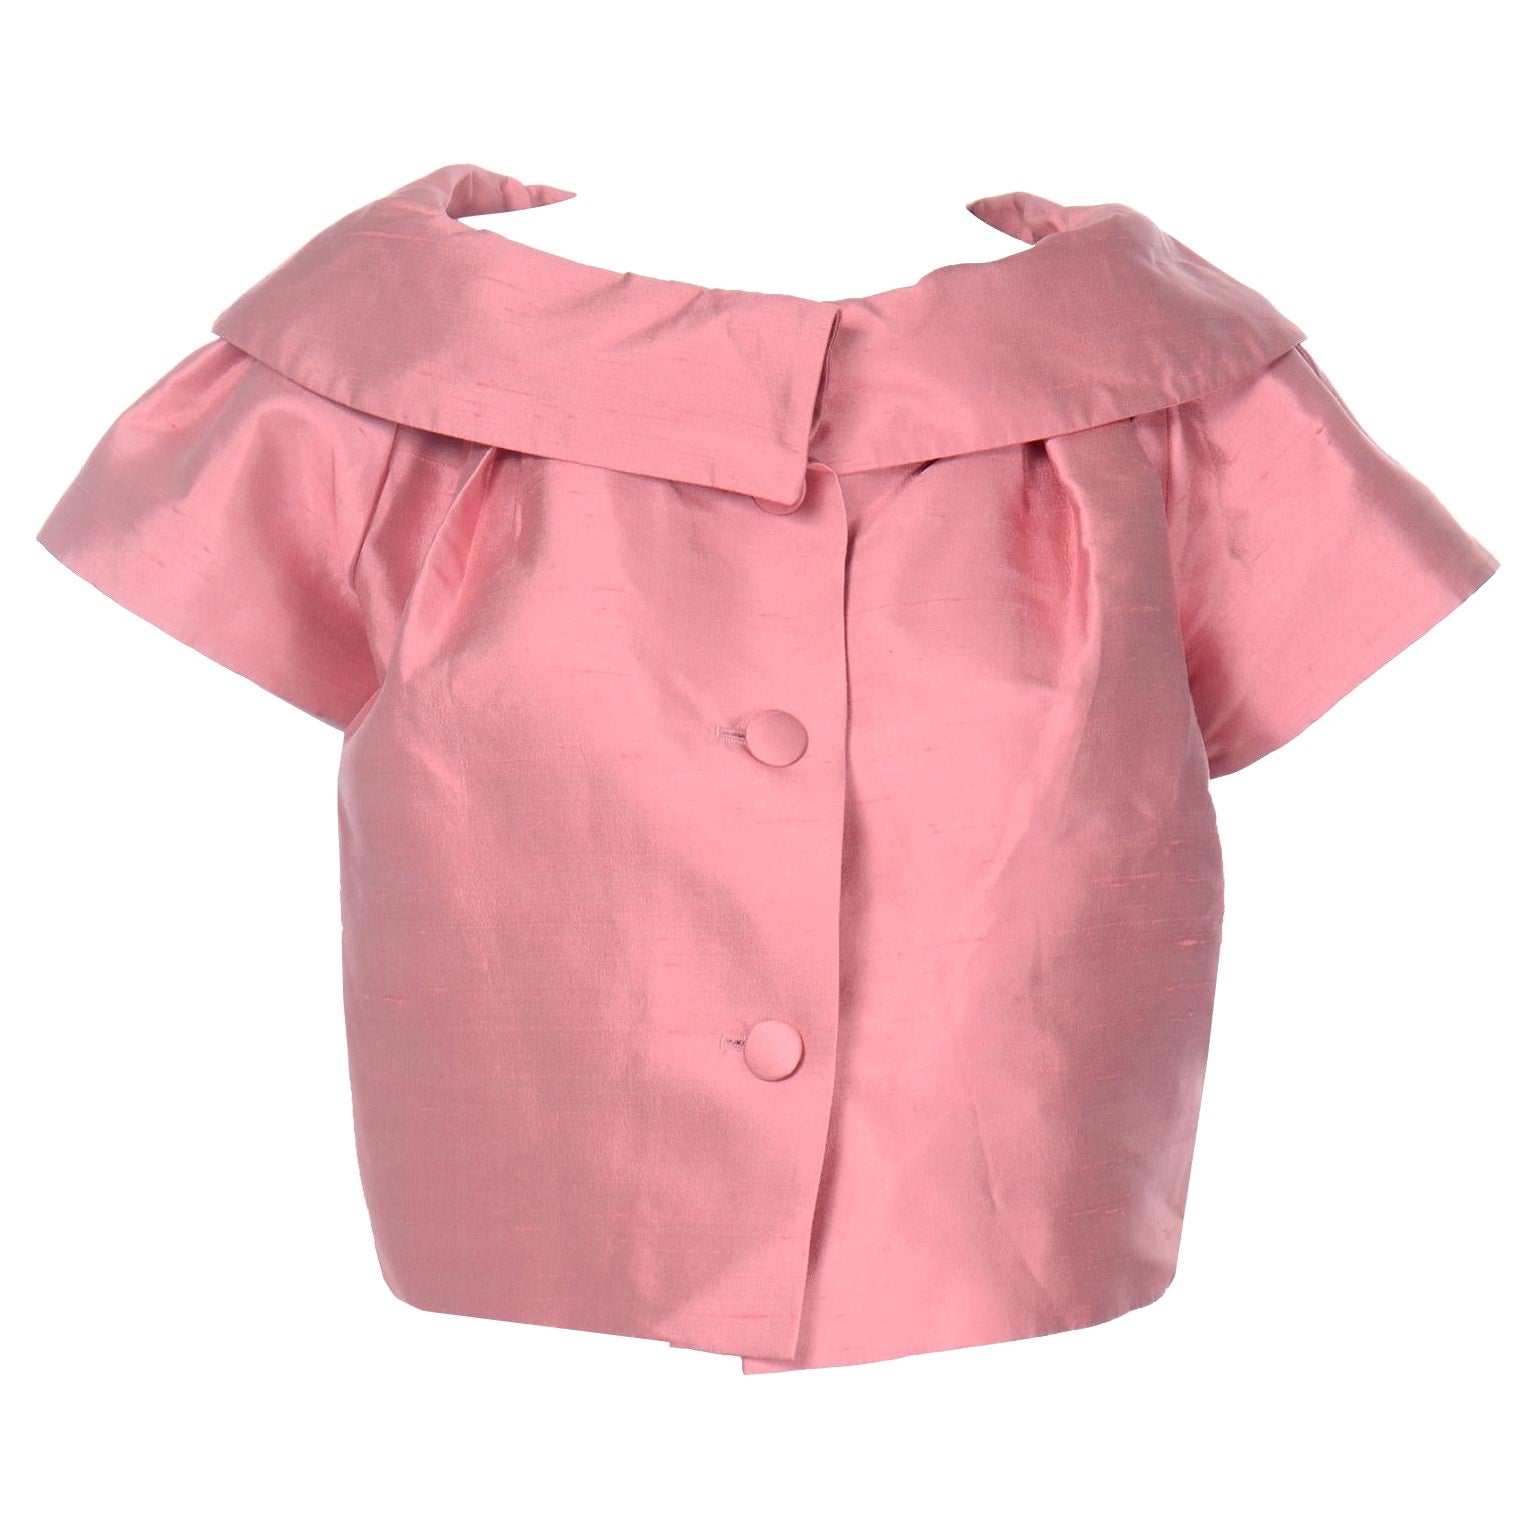 John Galliano for Christian Dior 1960s Inspired Pink 2008 Vintage Jacket Top